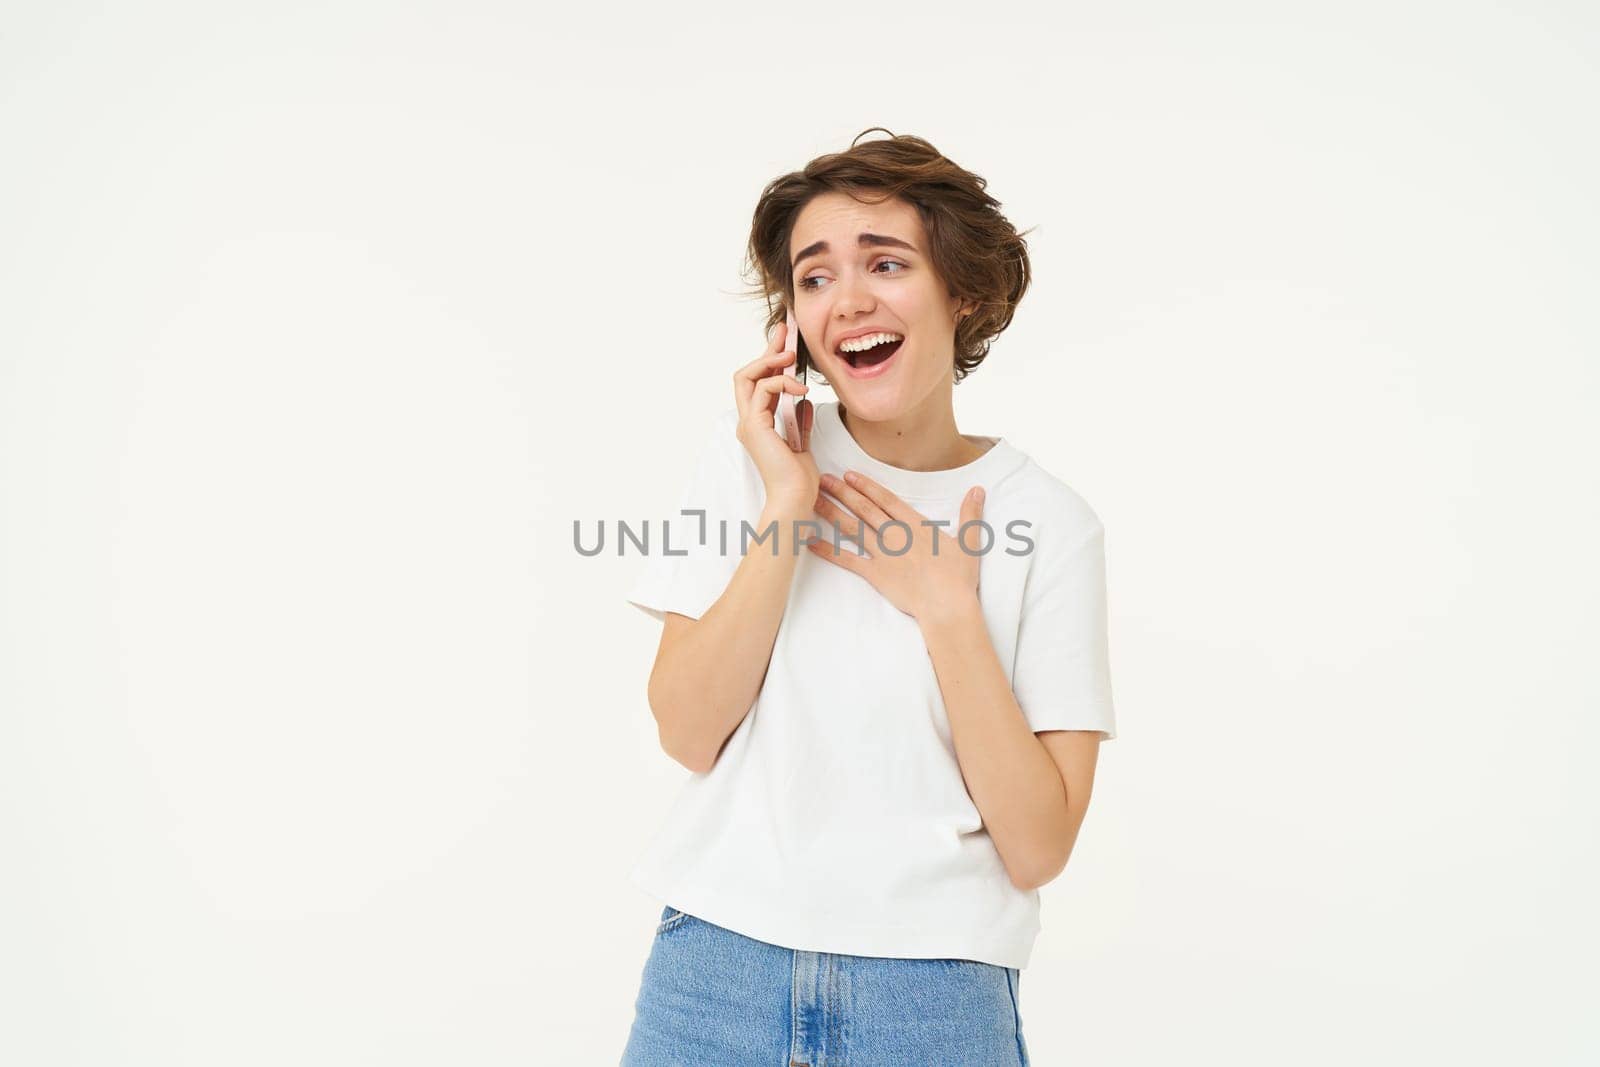 Happy woman casually talking on mobile phone and smiling, discussing something with friend over the telephone, white background.